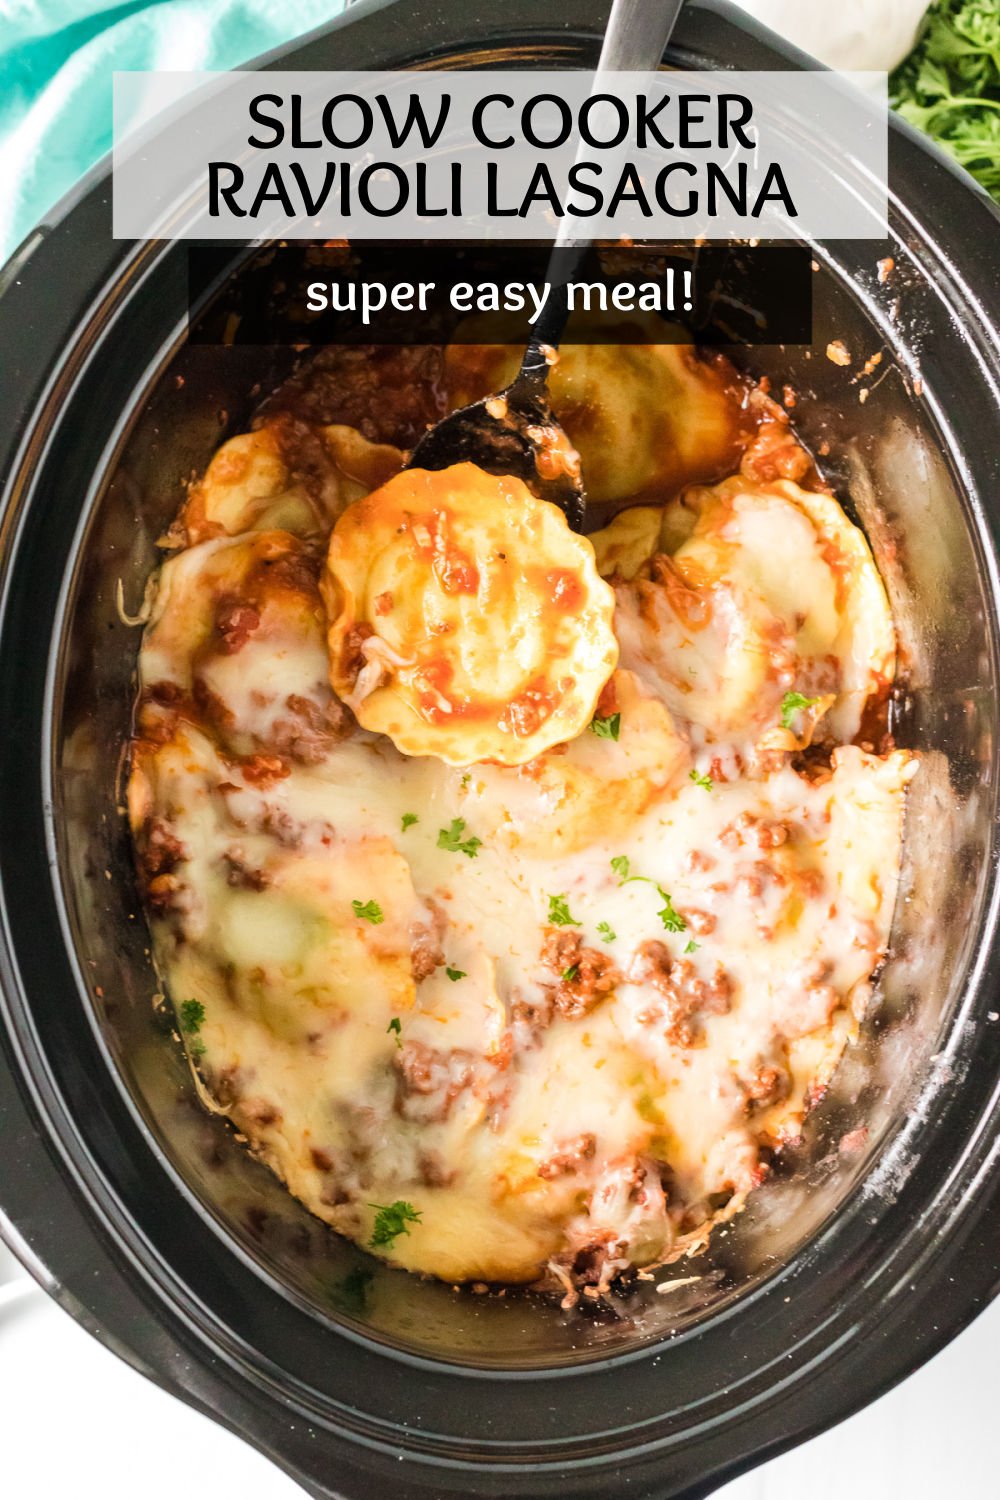 This shortcut slow cooker ravioli lasagna is made with only FOUR ingredients right in the crockpot. Start with your favorite ravioli, pair it with ground beef, pasta sauce, and mozzarella cheese for a lazy lasagna that the whole family will love. | www.persnicketyplates.com